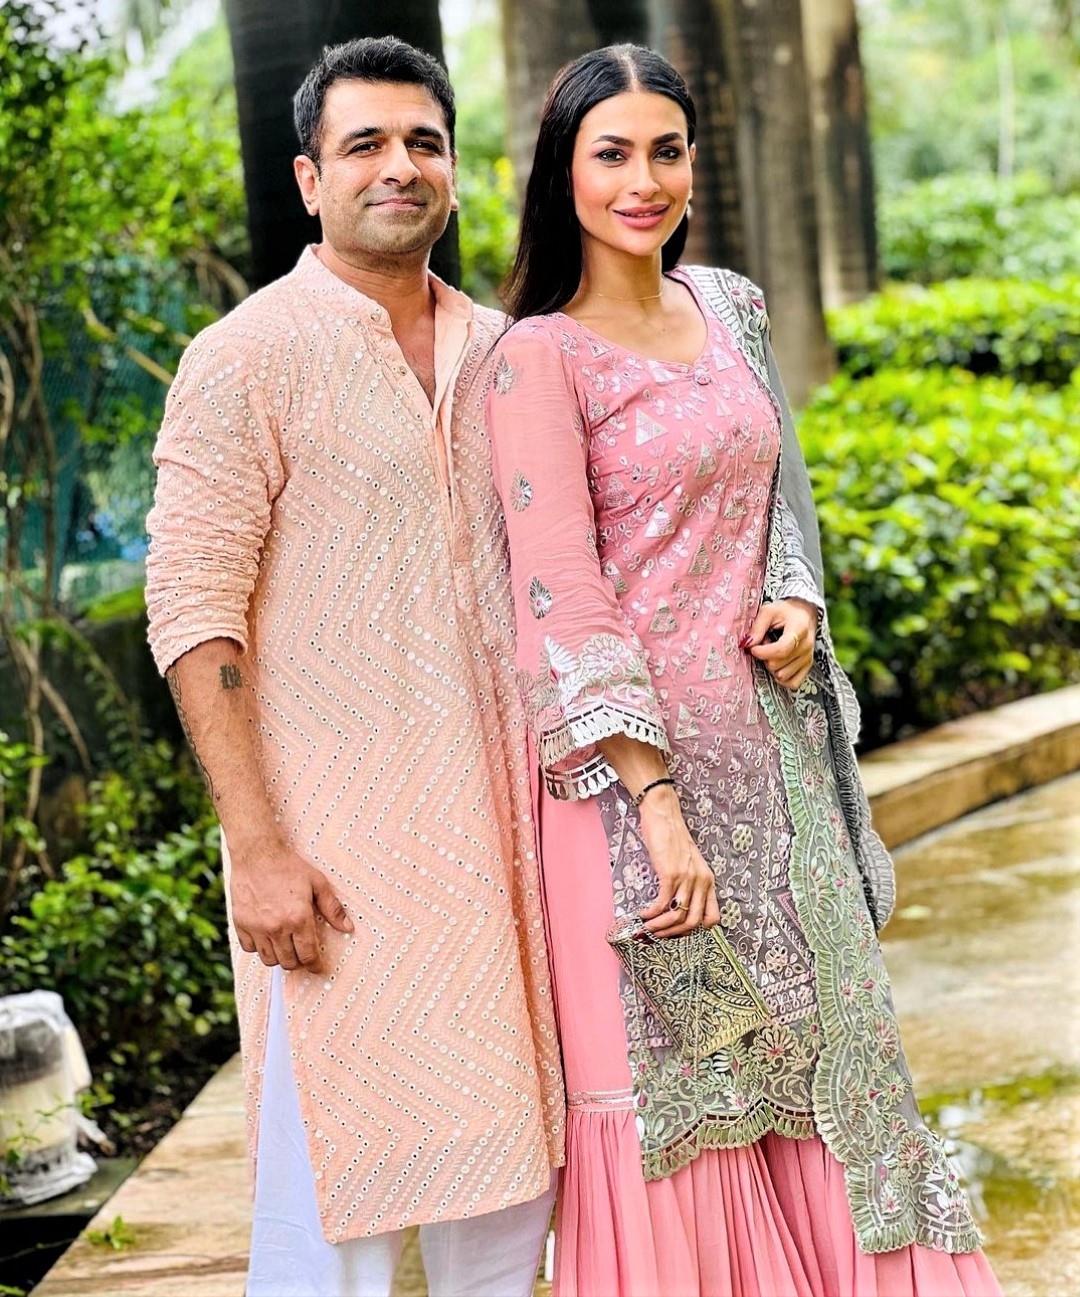 Eijaz Khan and PavitraPunia, one of the most loved couples in the TV industry, are engaged now